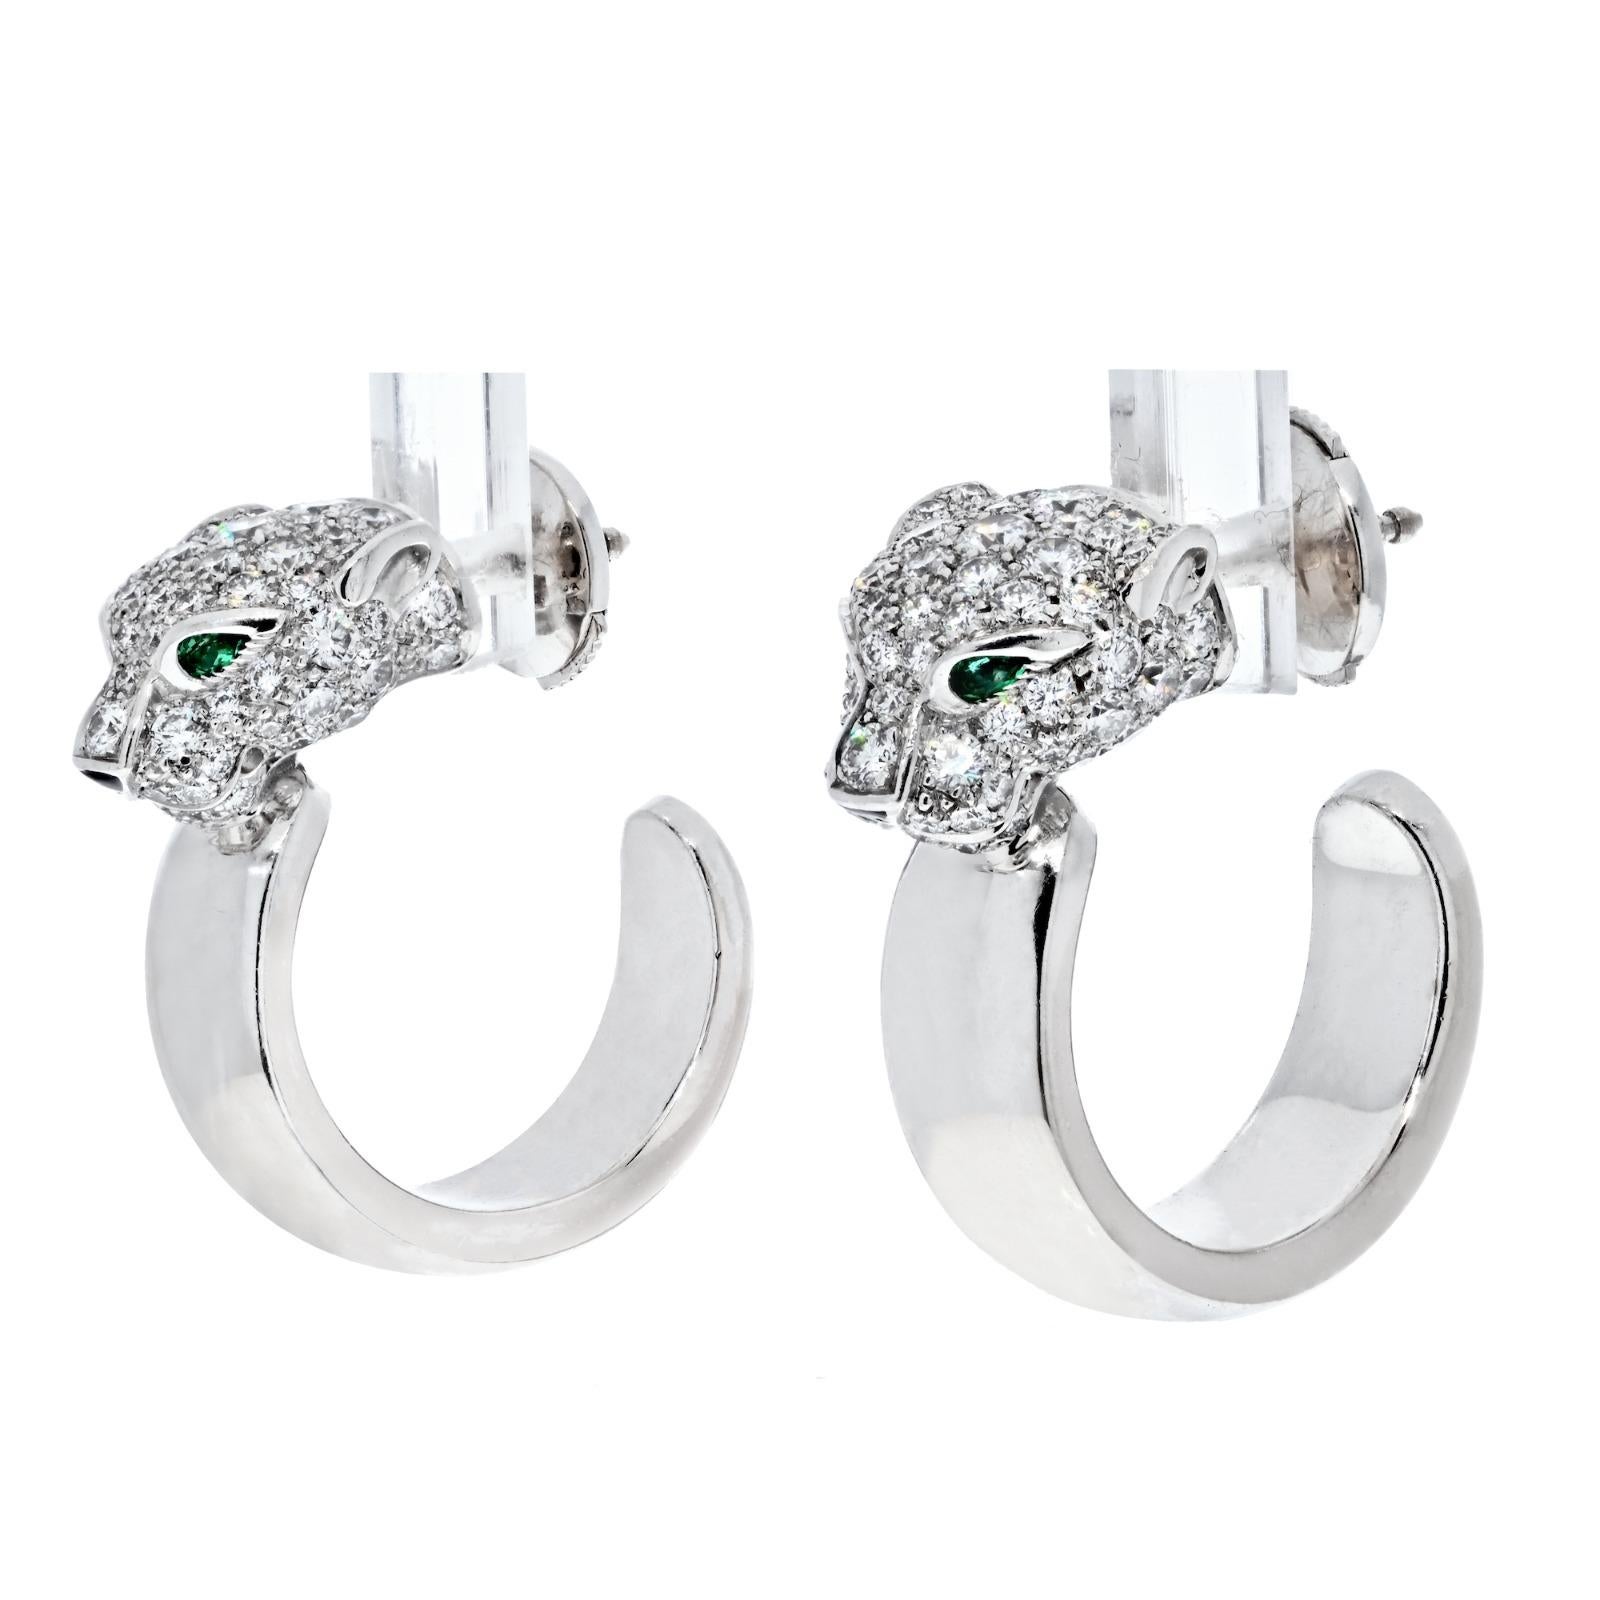 Cartier White Gold, Emerald and Diamond Panthère Earrings.
The earrings designed as panthers whose eyes are set with emeralds and whose heads are pavé set with diamonds, the heads resting on white gold hoops.

Diamonds weighing a total of